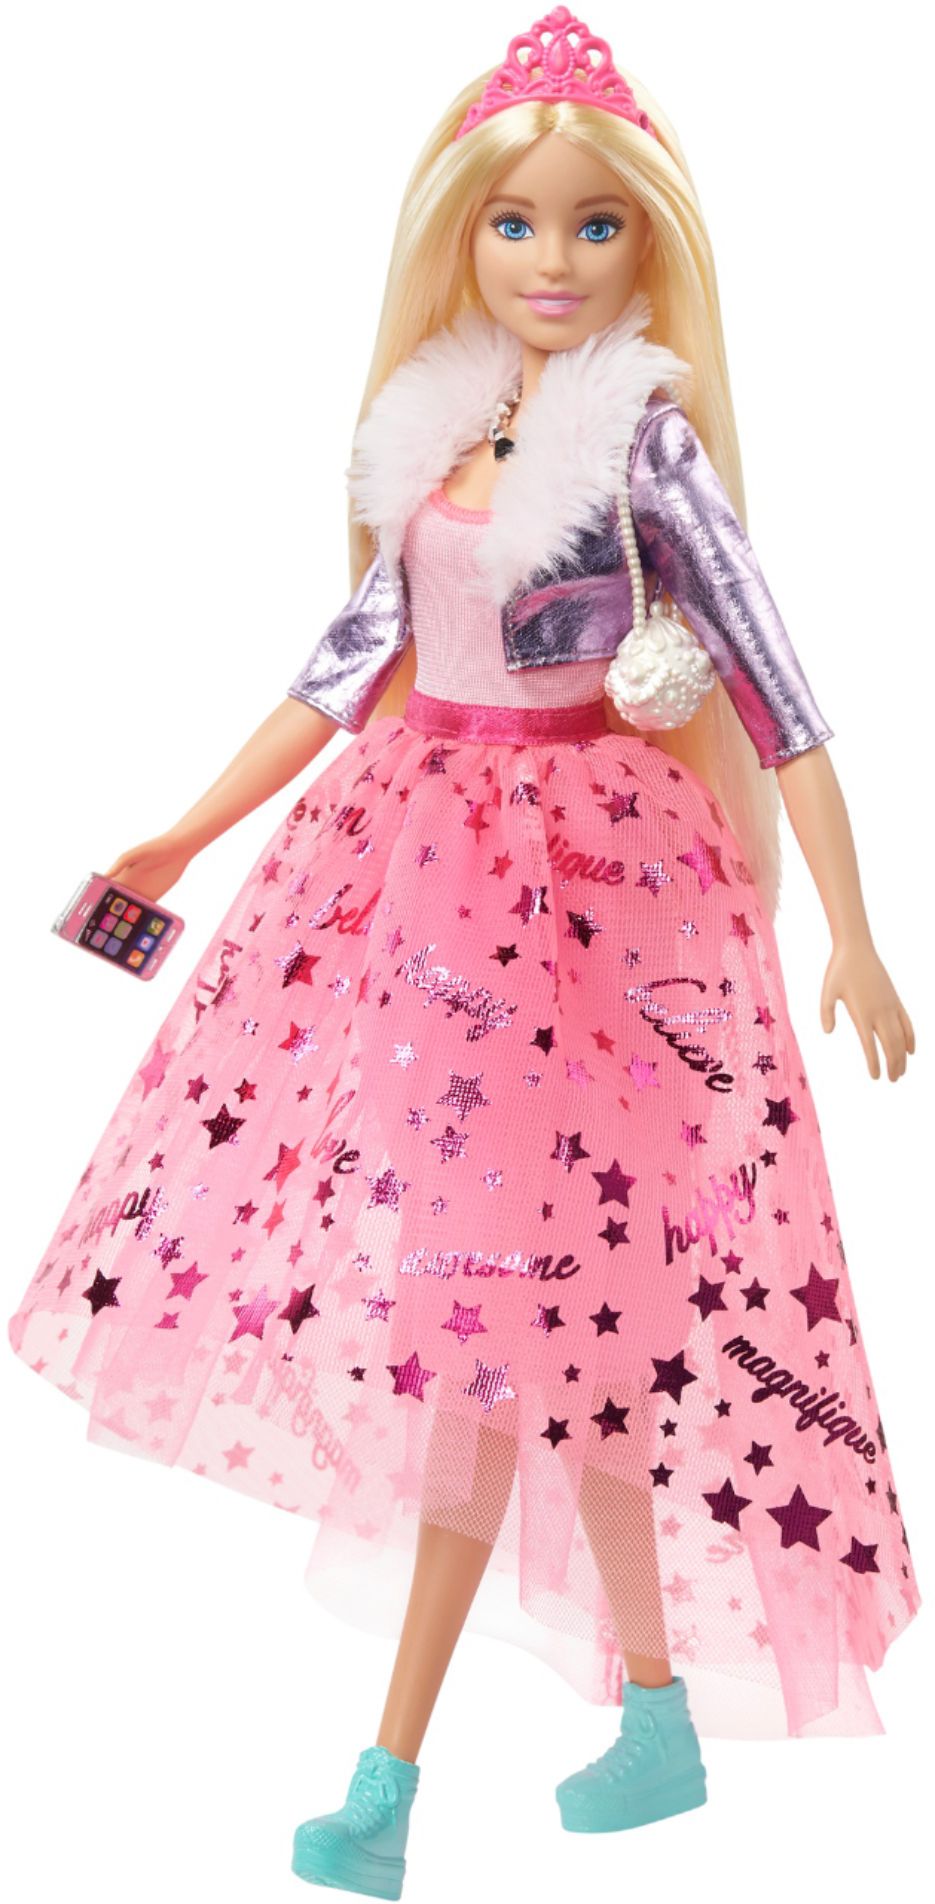 Left View: Barbie Deluxe Princess Adventure Doll - Pink